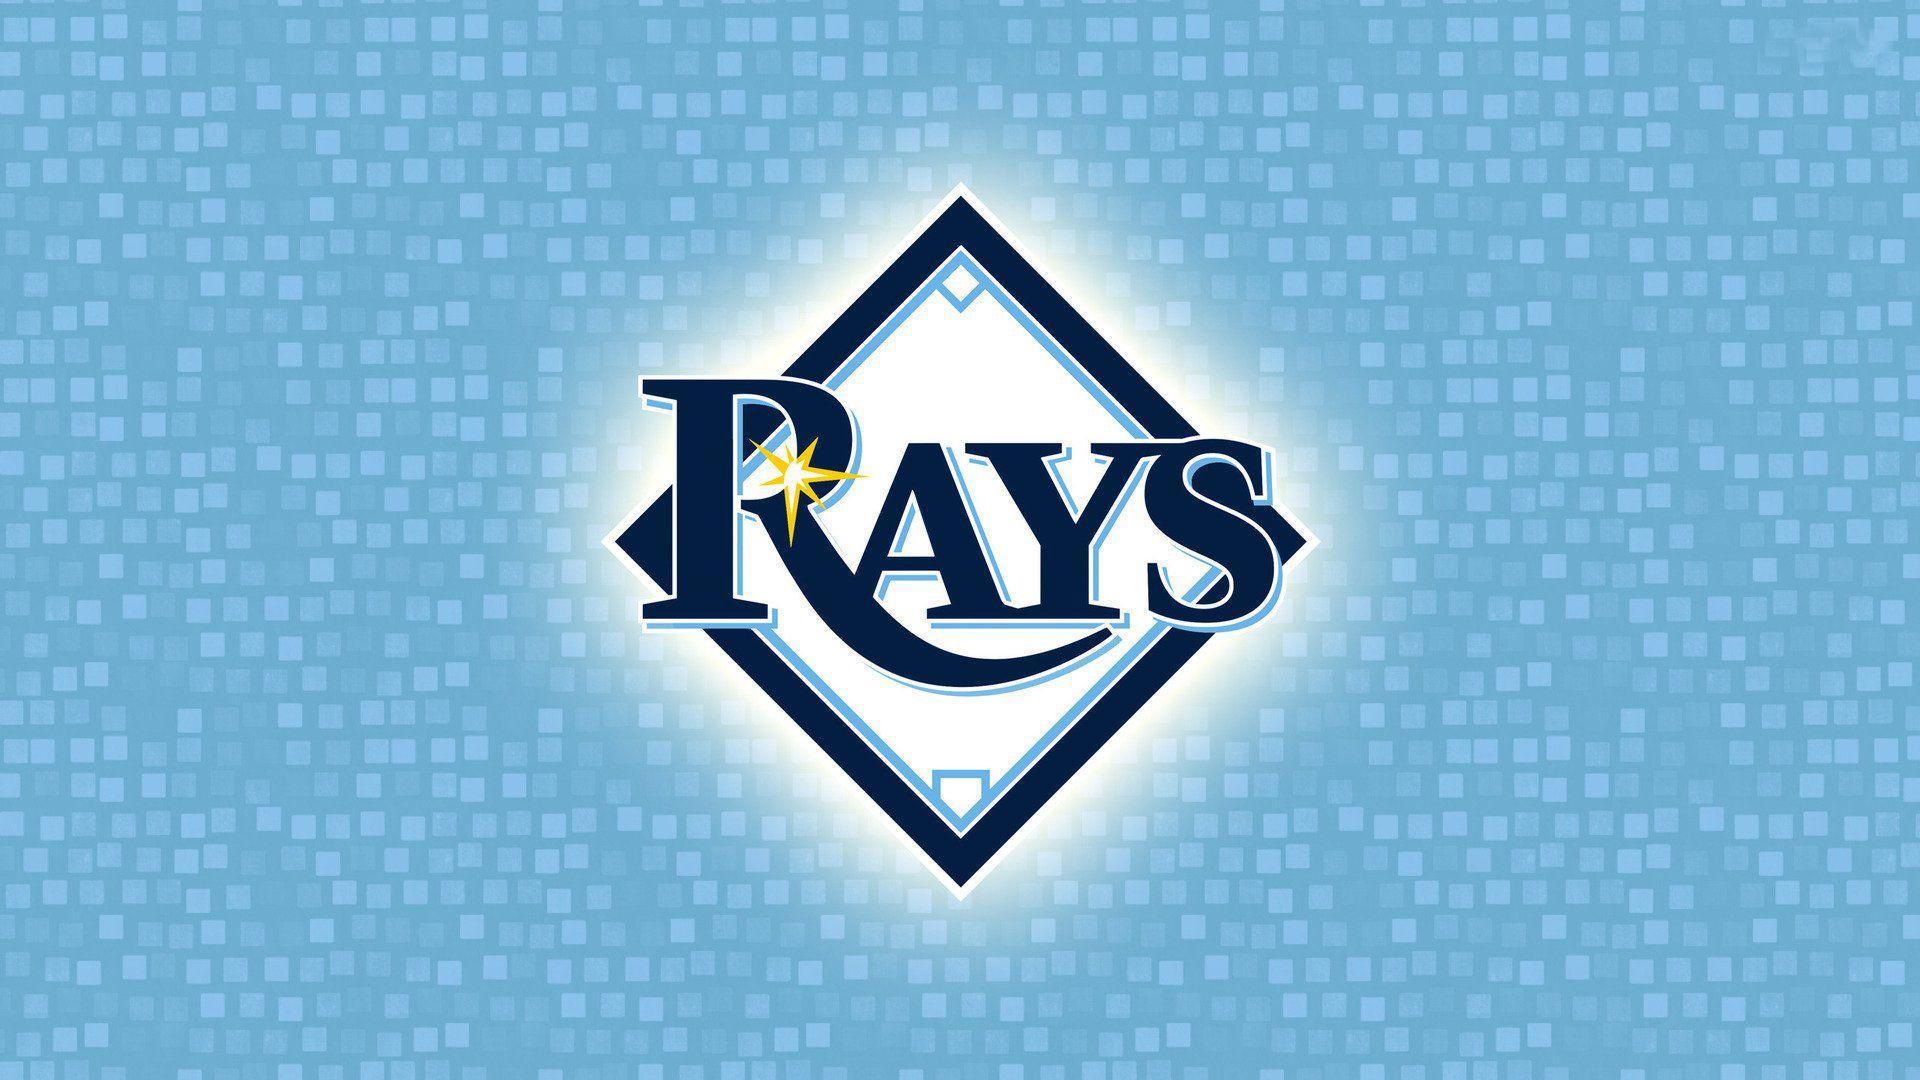 New wallpaper for your lock screen courtesy of the MLB twitter account  r tampabayrays